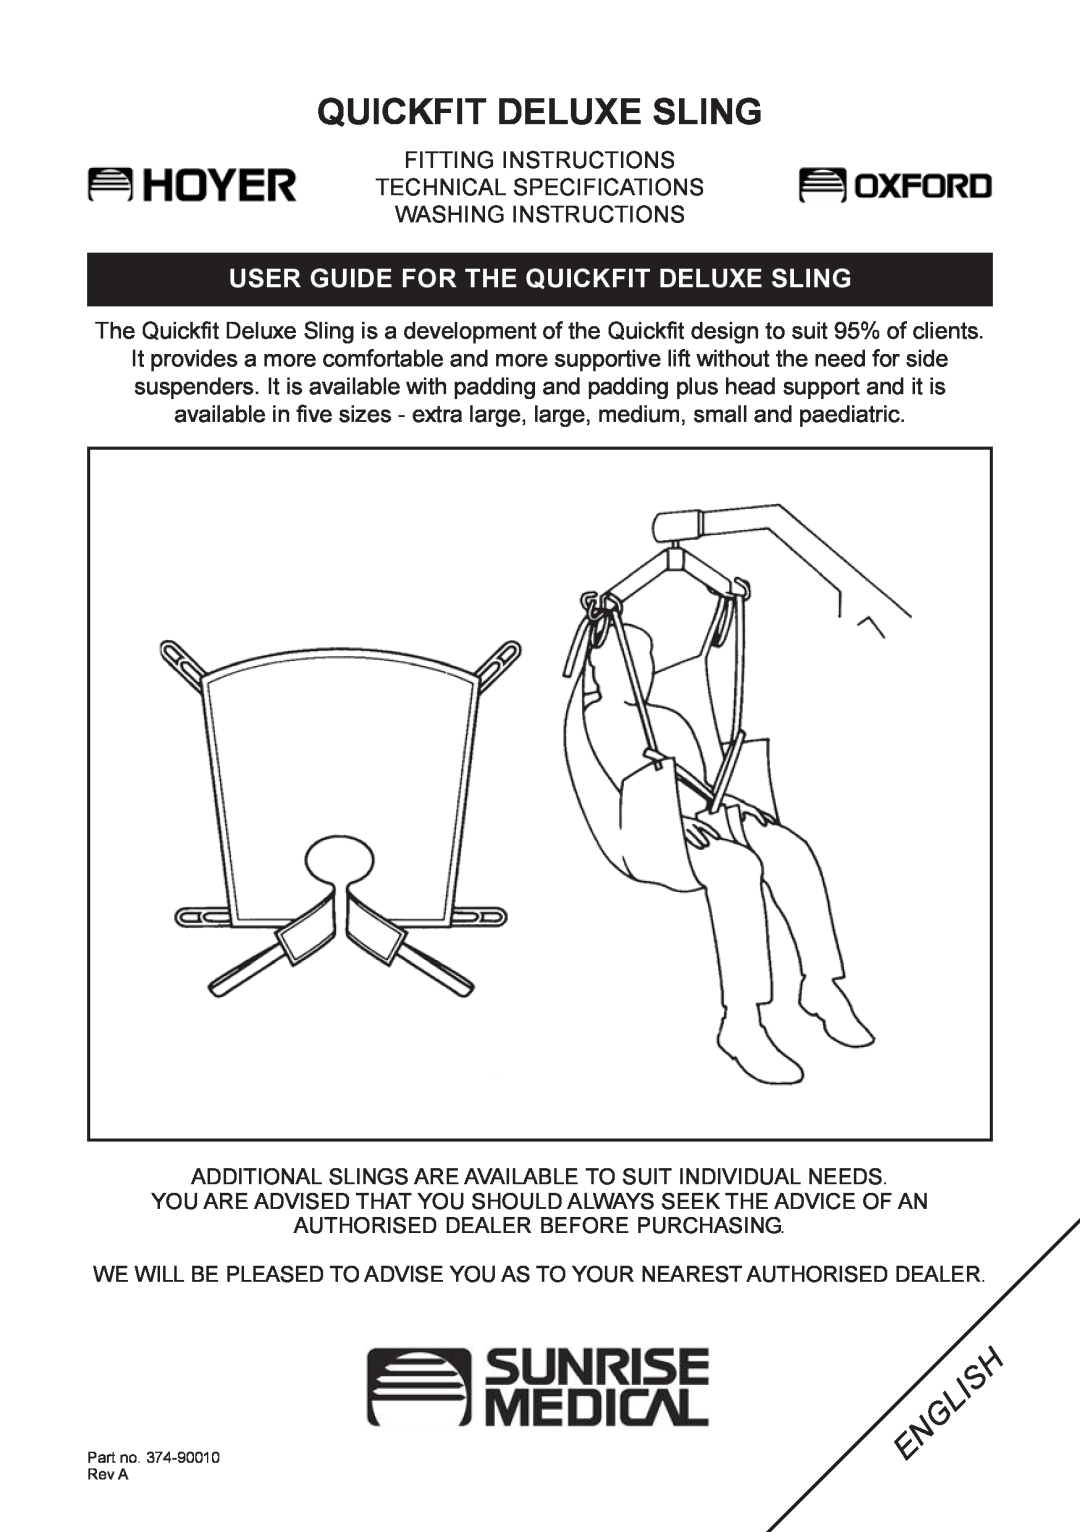 Sunrise Medical 374-90010 technical specifications User Guide For The Quickfit Deluxe Sling, Washing Instructions 